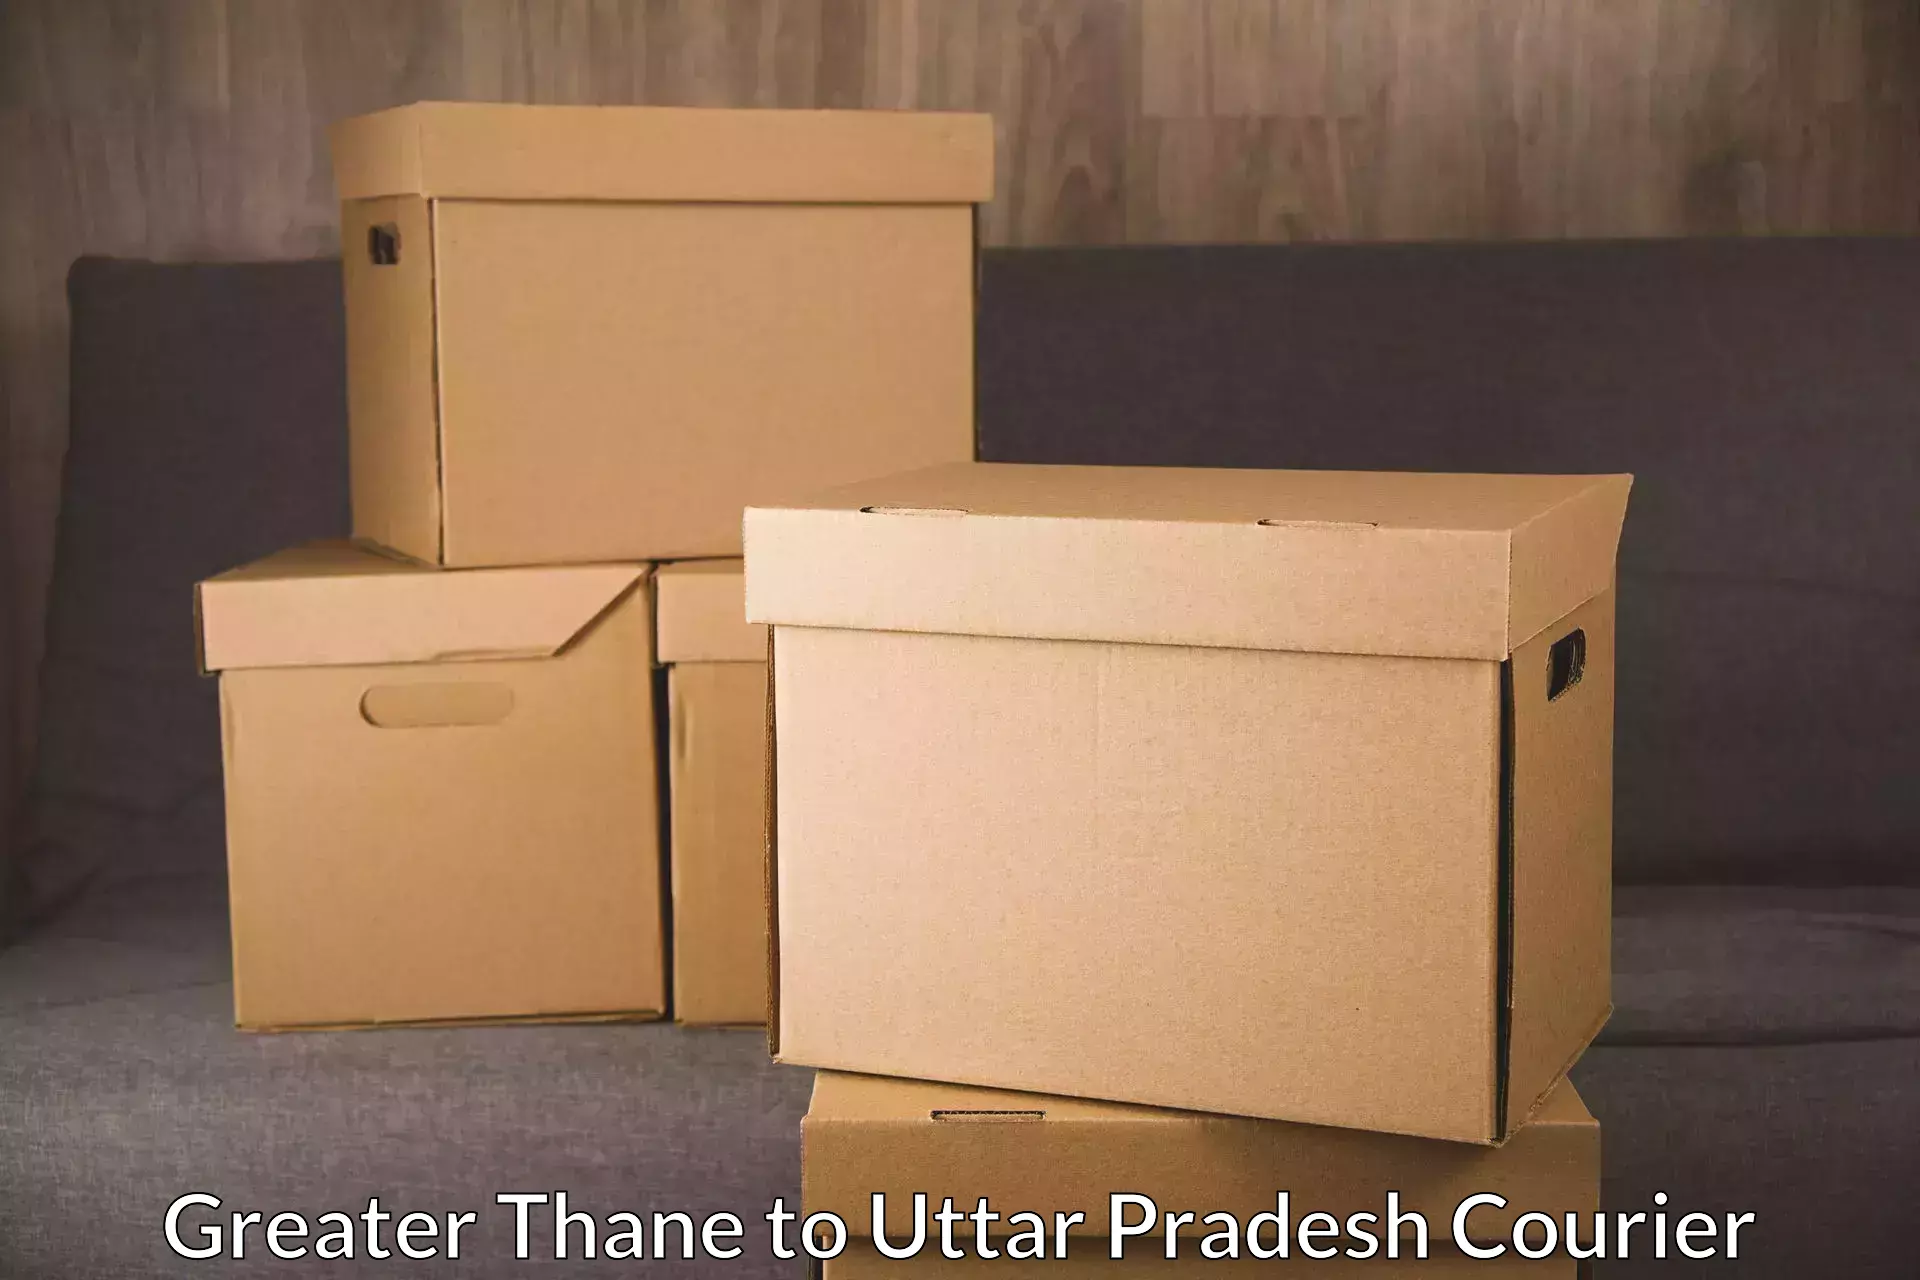 High-speed parcel service Greater Thane to Mahasi